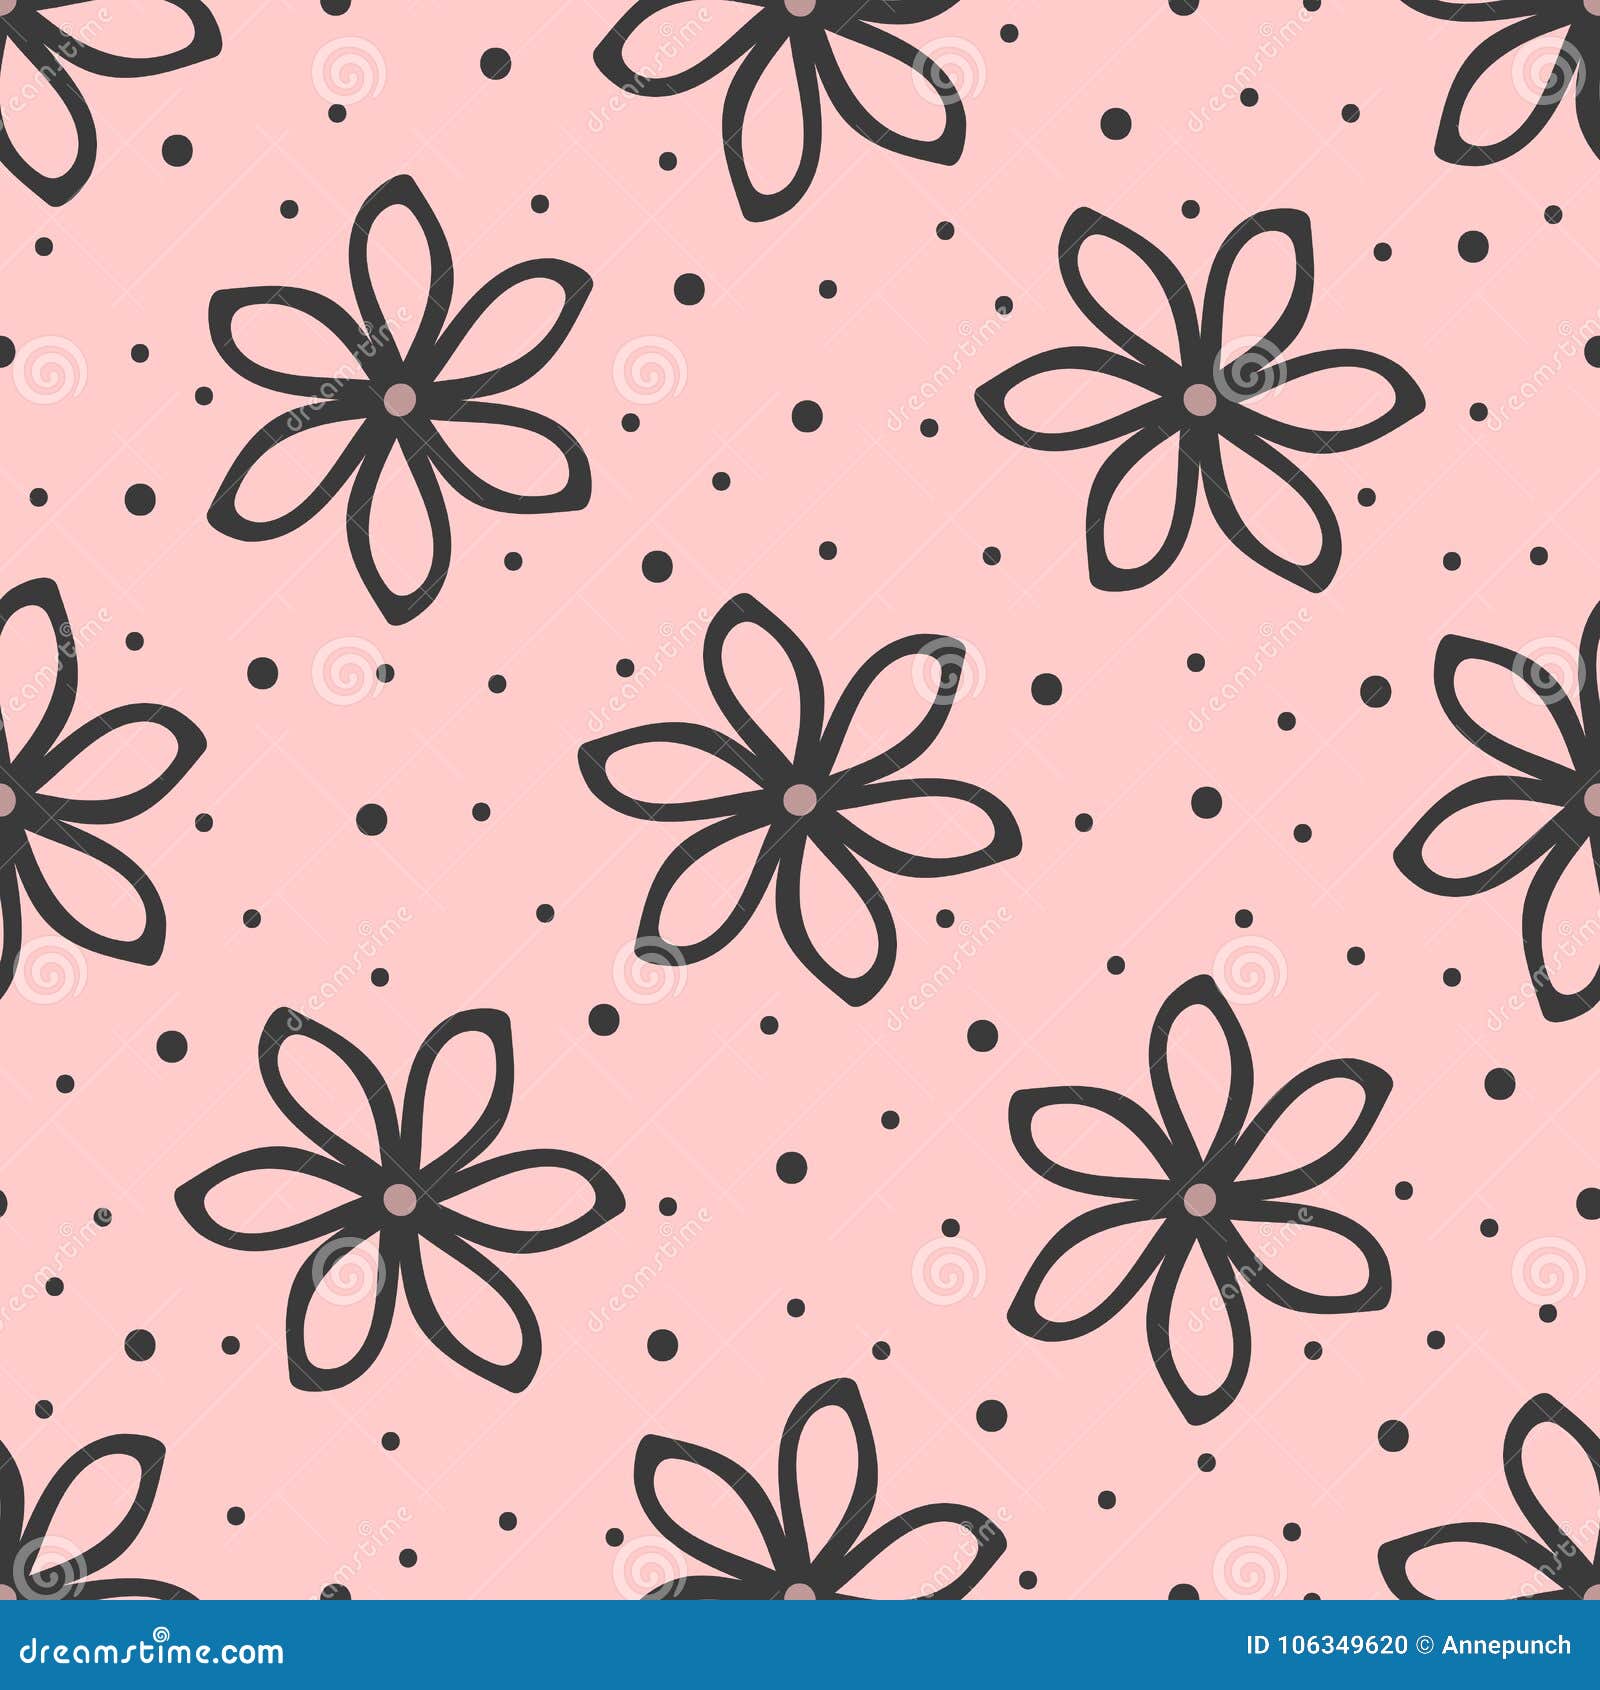 outlines of flowers and polka dot. simple floral seamless pattern.